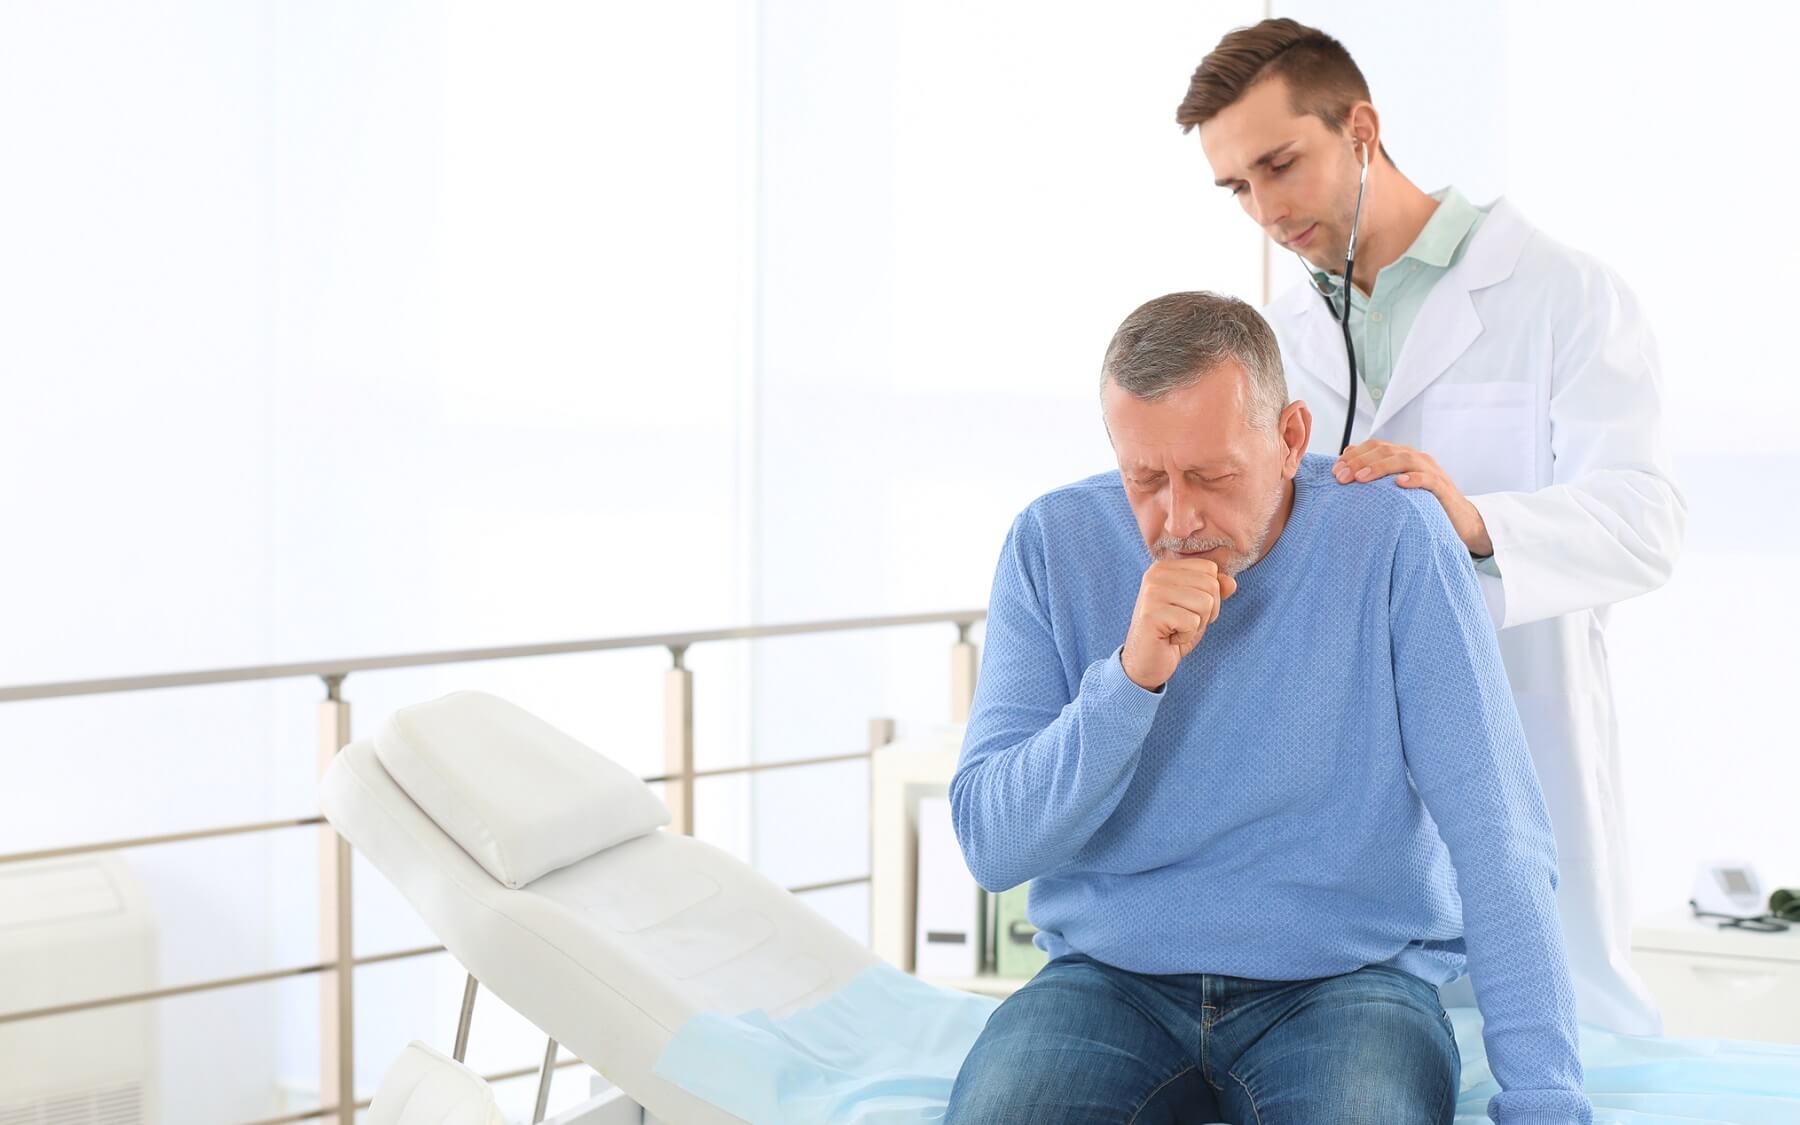 Patient getting a lung exam from a doctor